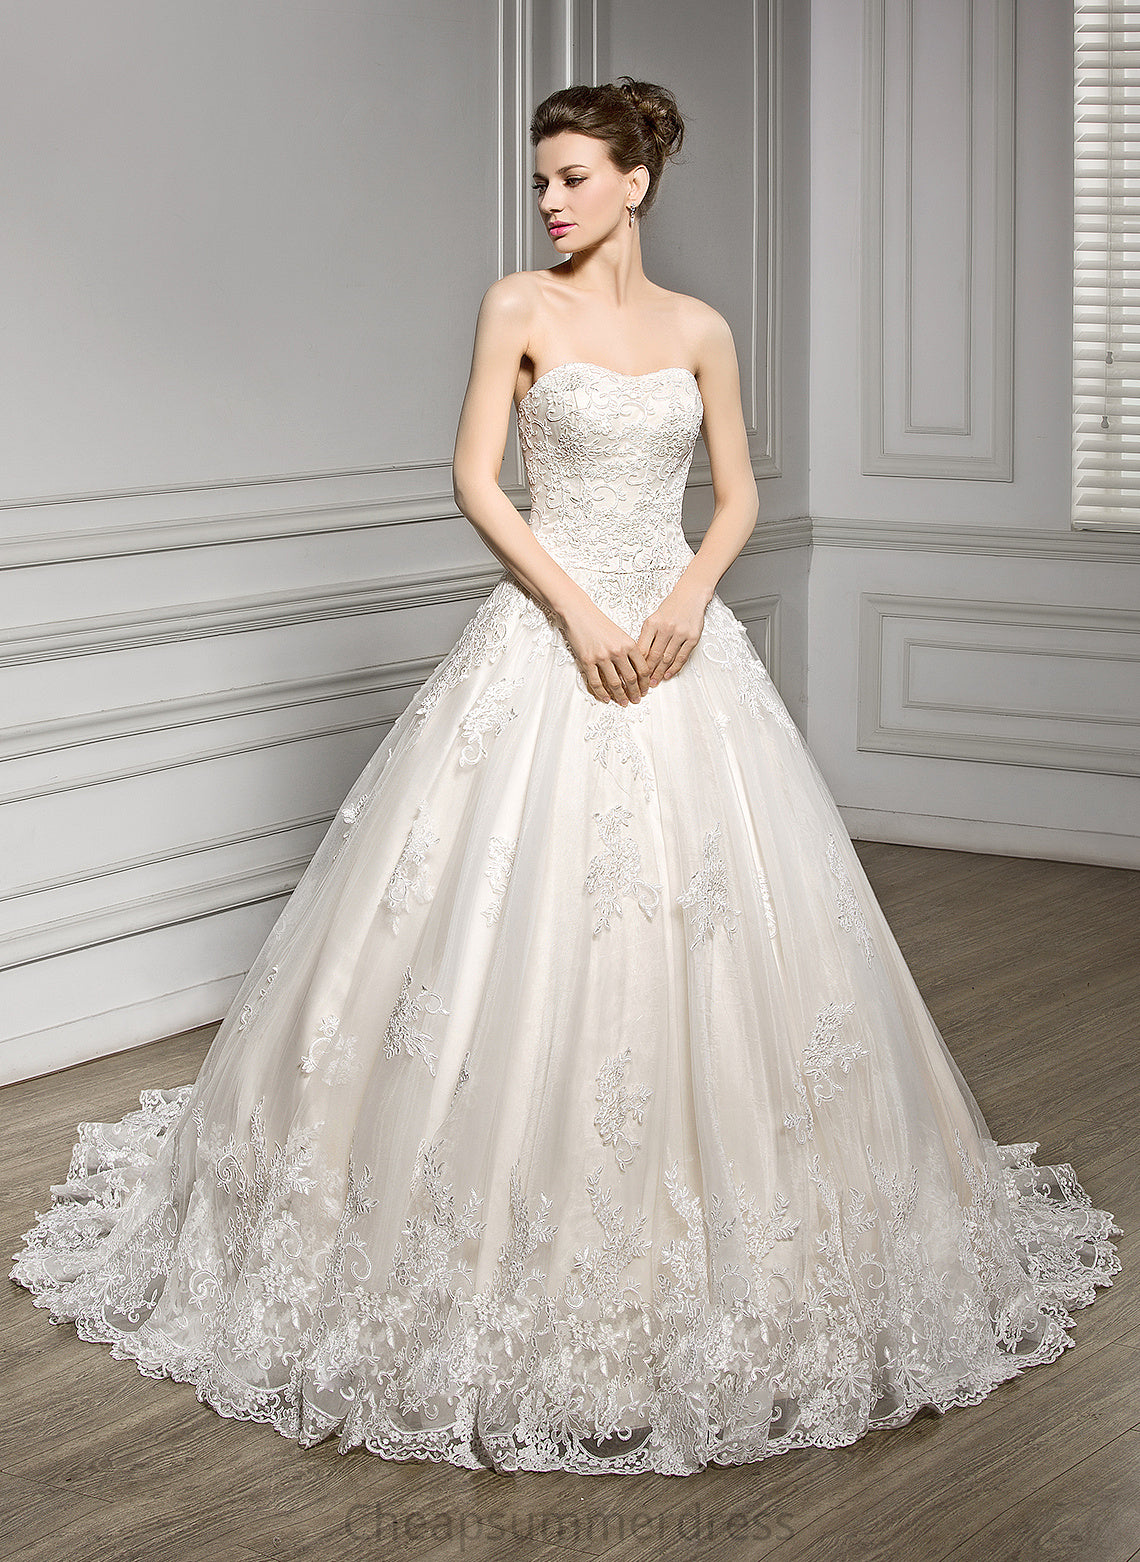 Train Ball-Gown/Princess Wedding Dresses Wedding Court Olive Tulle Lace Dress Sweetheart